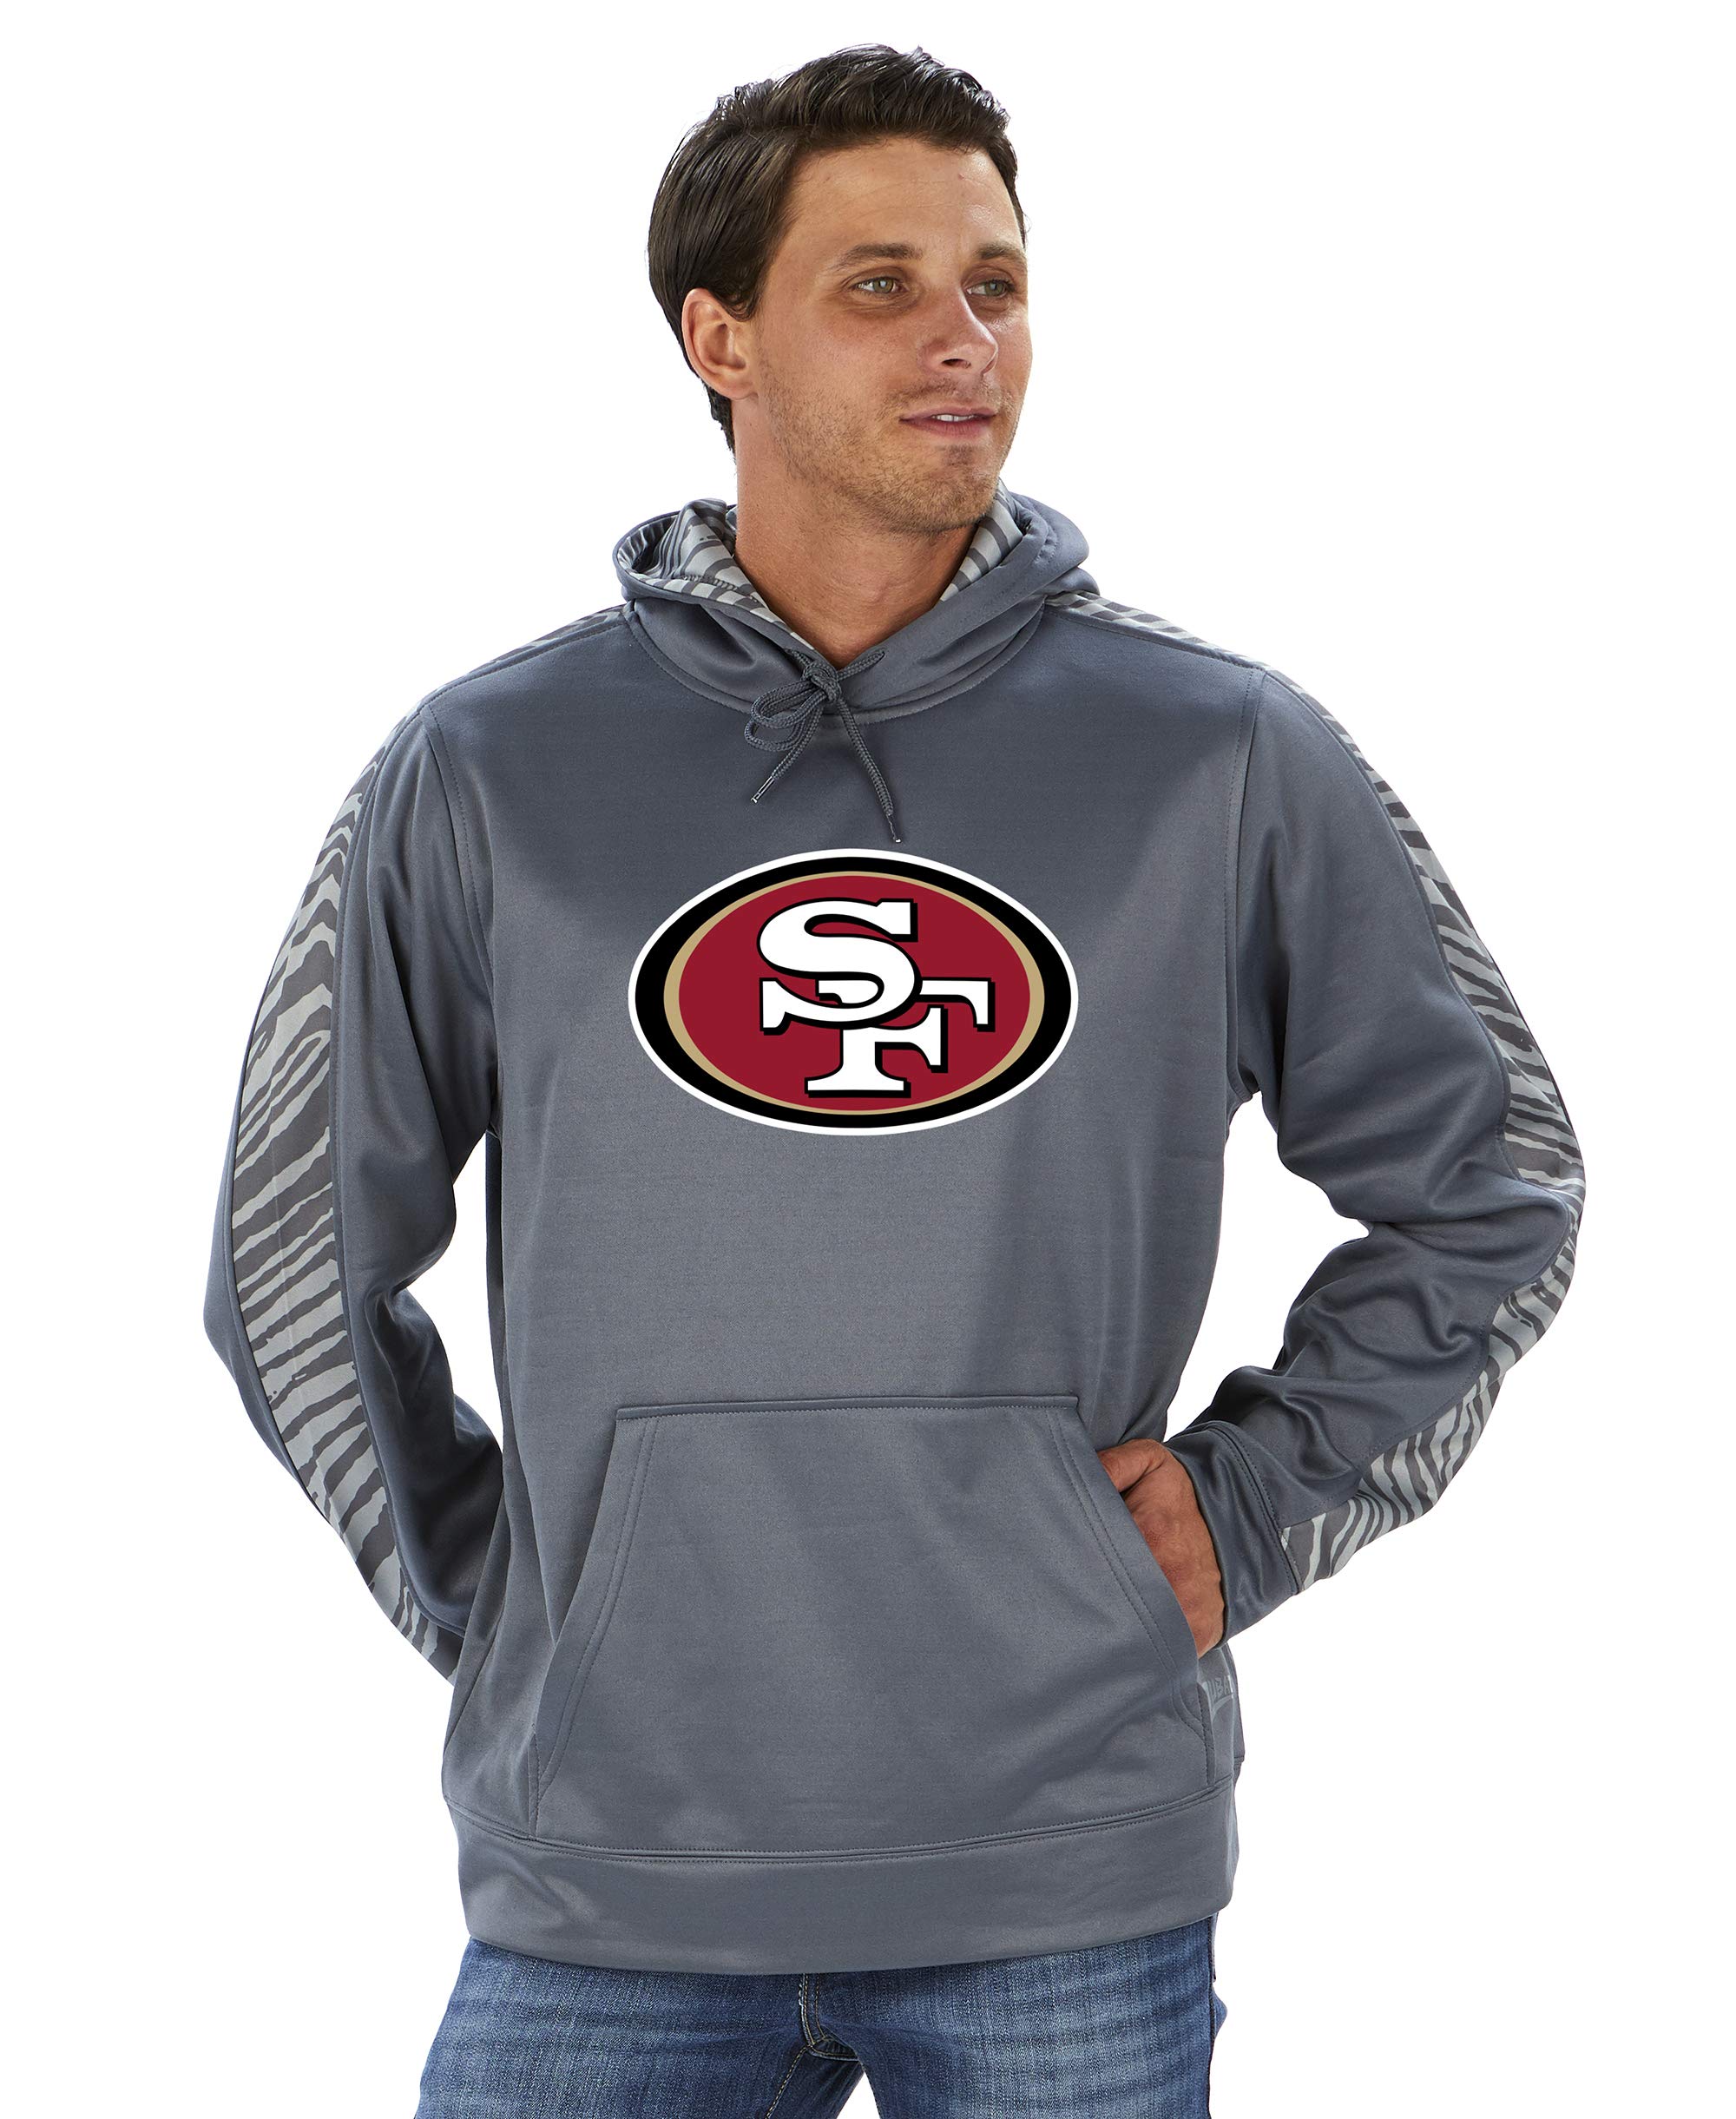 Officially Licensed Zubaz Mens NFL NFL Mens Pullover Hoodie, gray